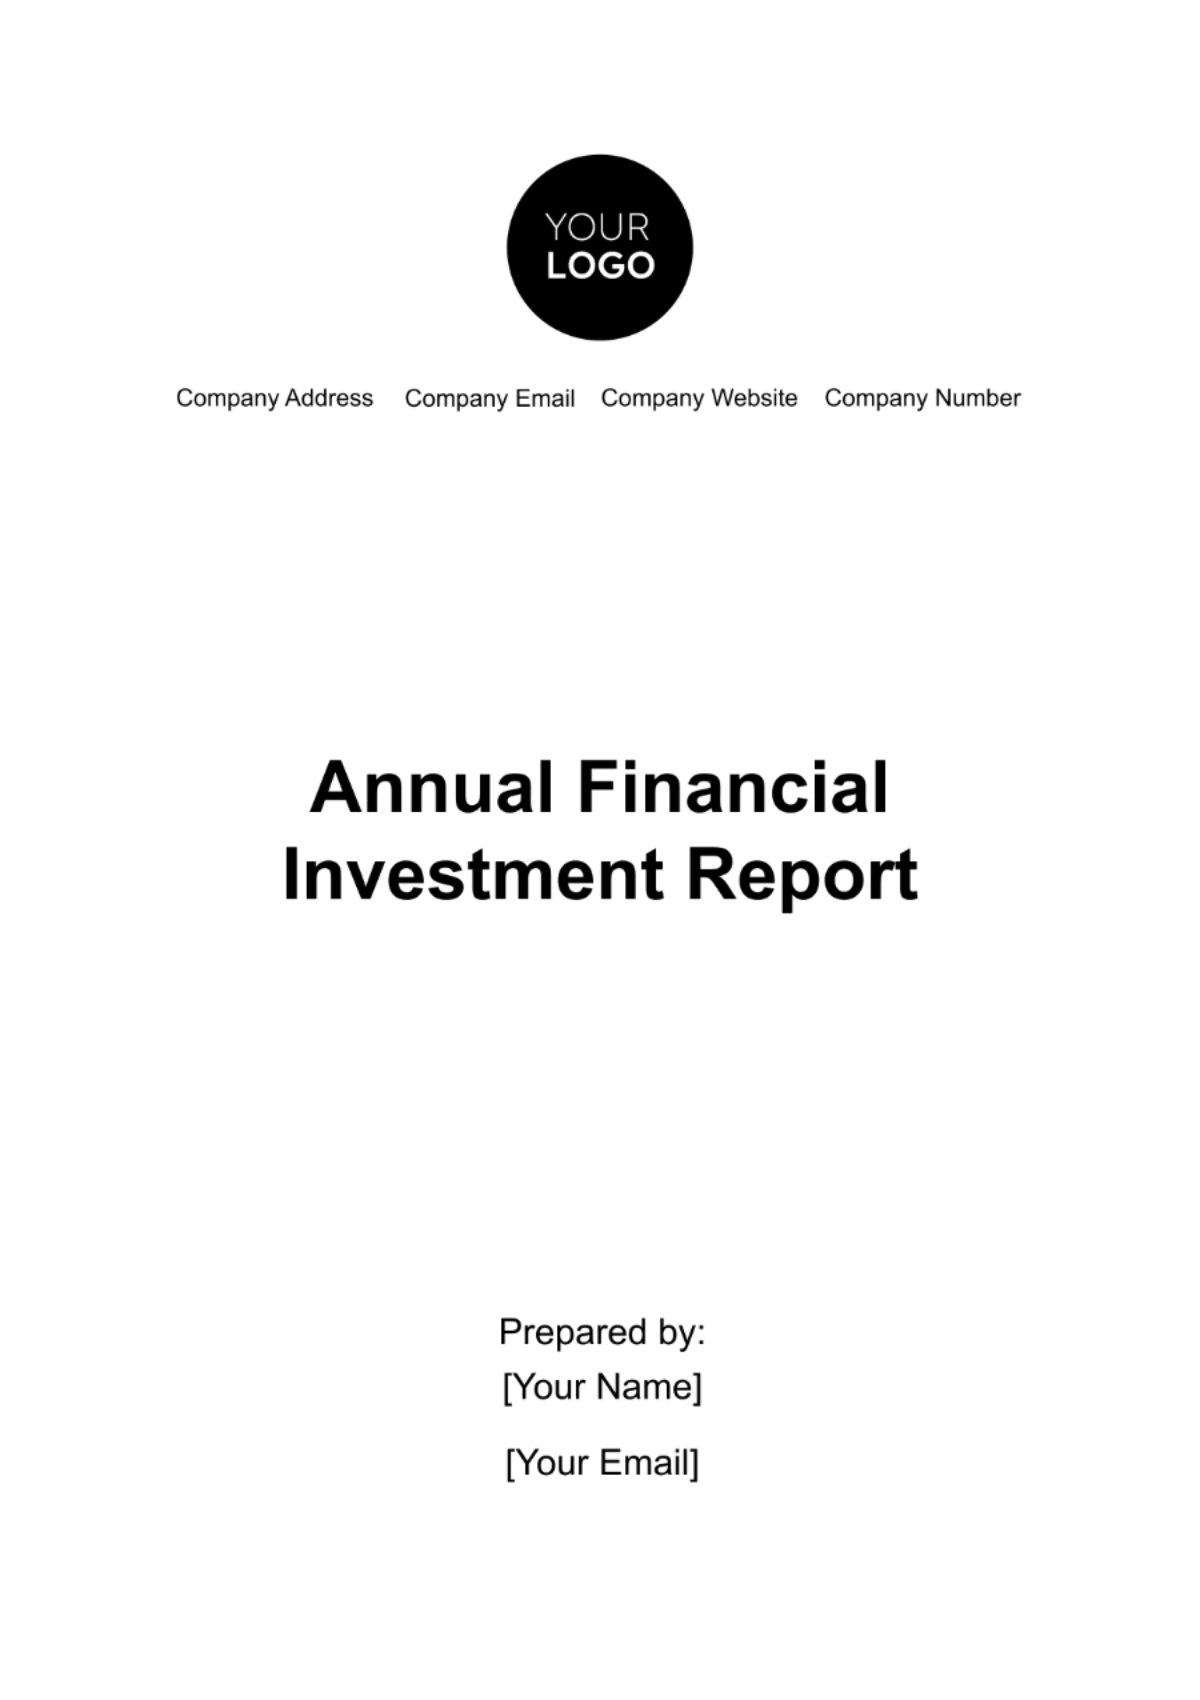 Annual Financial Investment Report Template